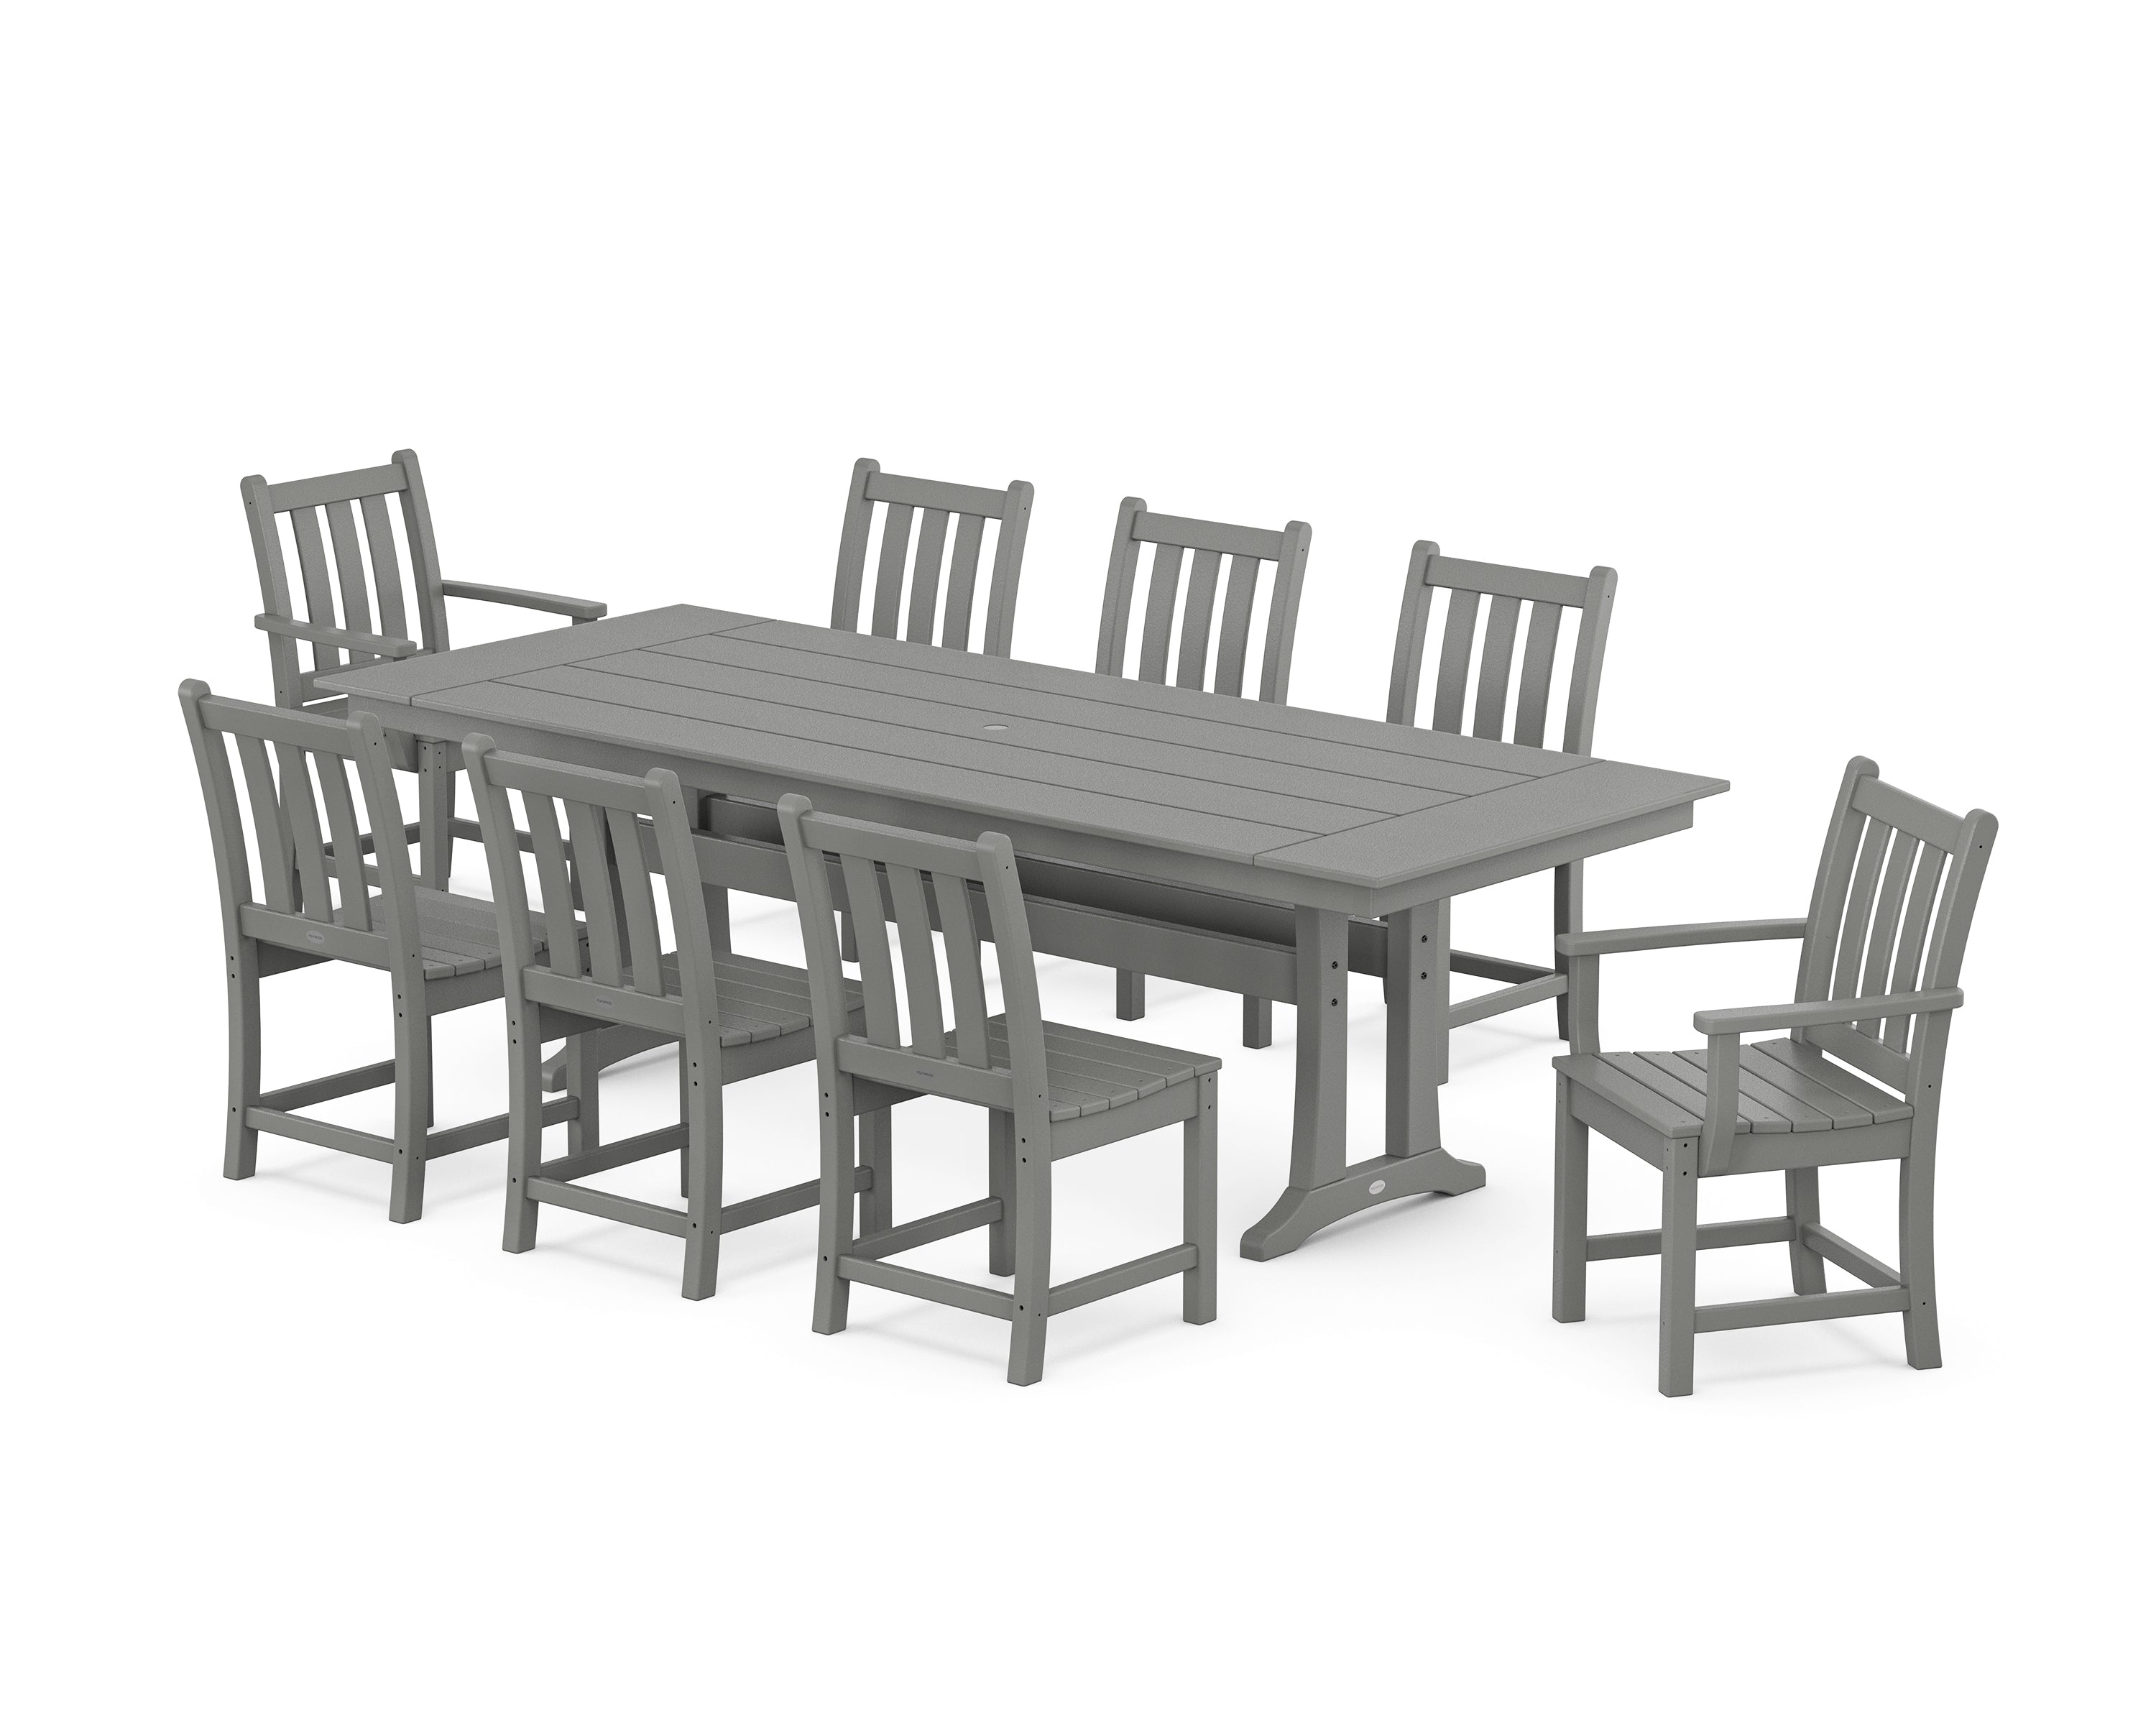 POLYWOOD® Traditional Garden 9-Piece Farmhouse Dining Set with Trestle Legs in Slate Grey